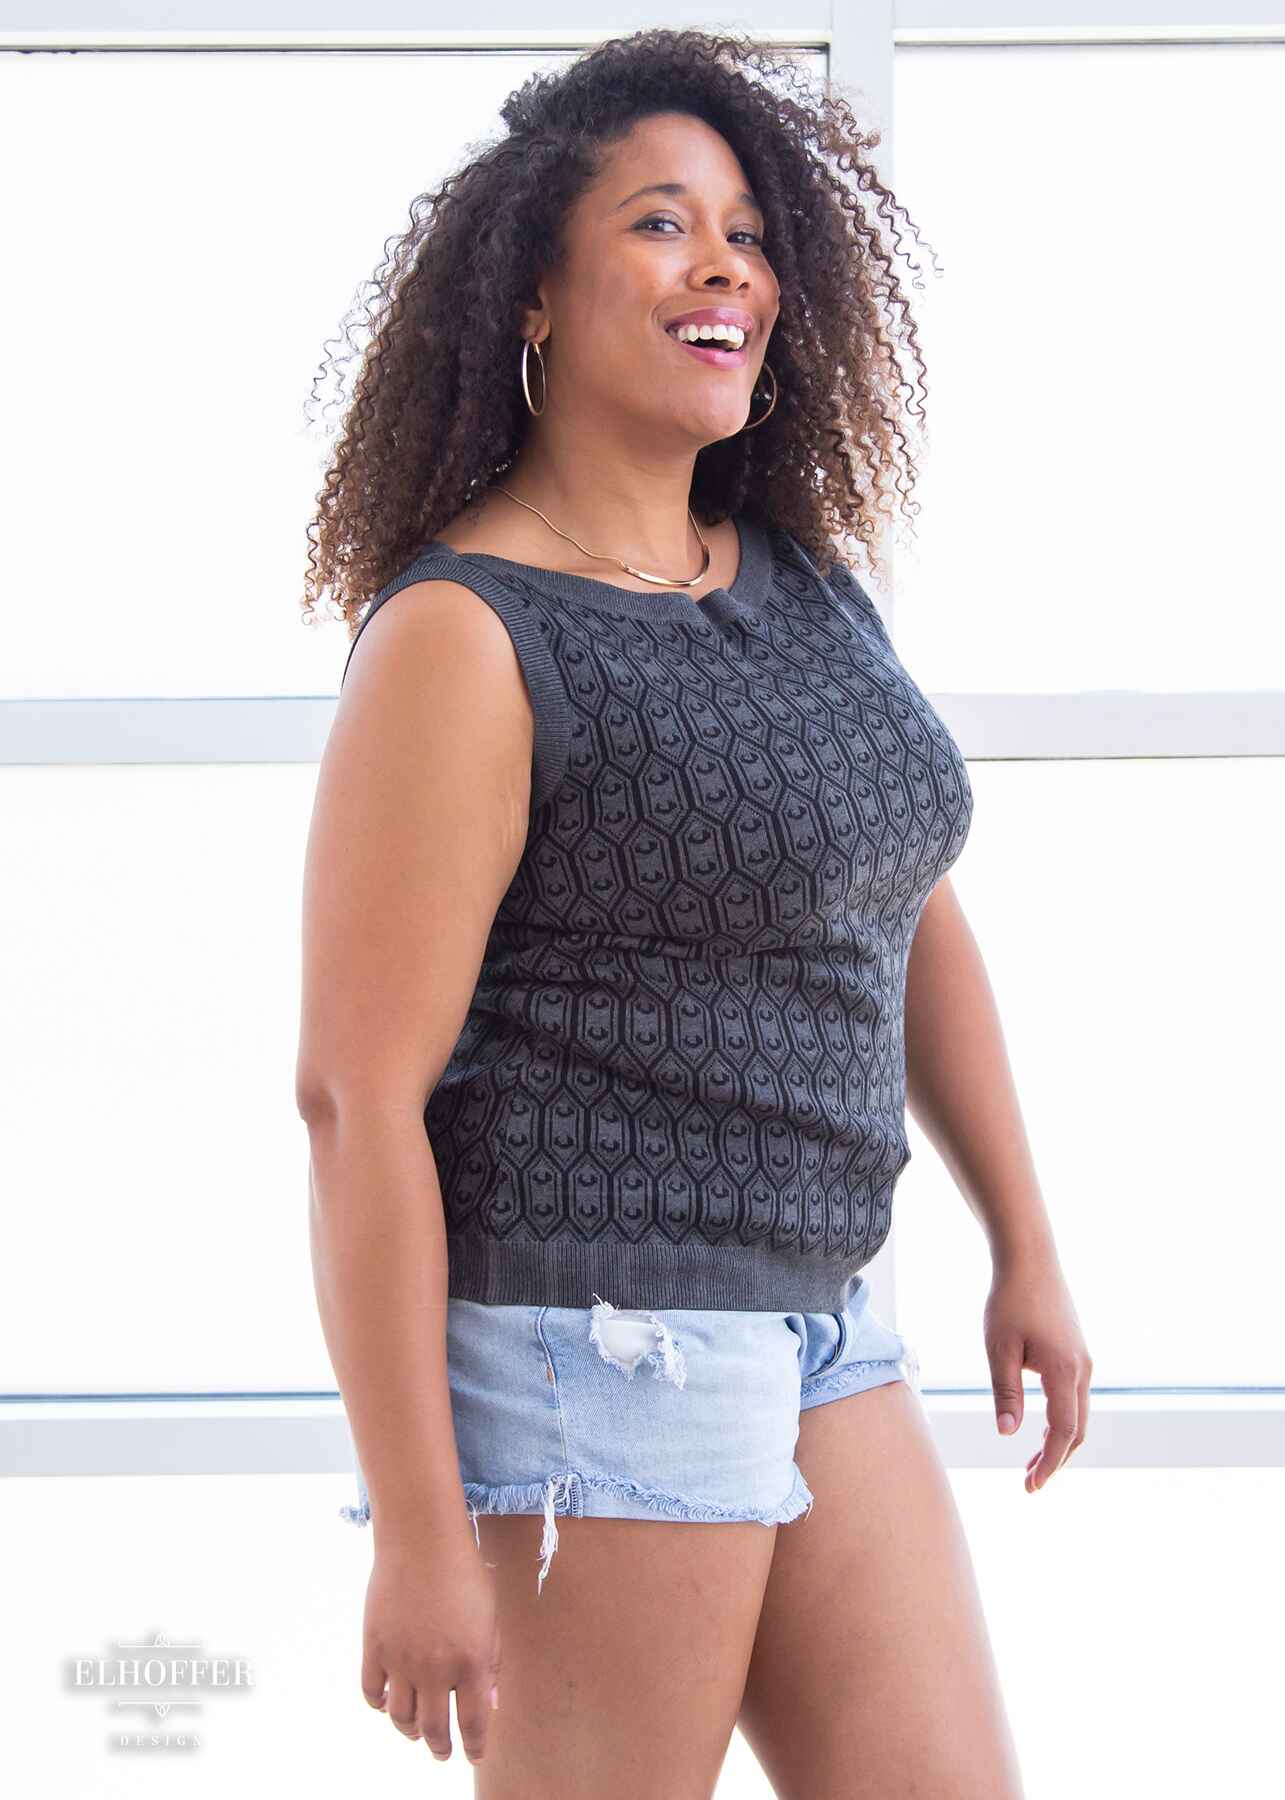 Francesca, a light brown skinned L model with long dark brown tight curly hair, is smiling while wearing a knit sleeveless top with a boatneck and an armor plated design.